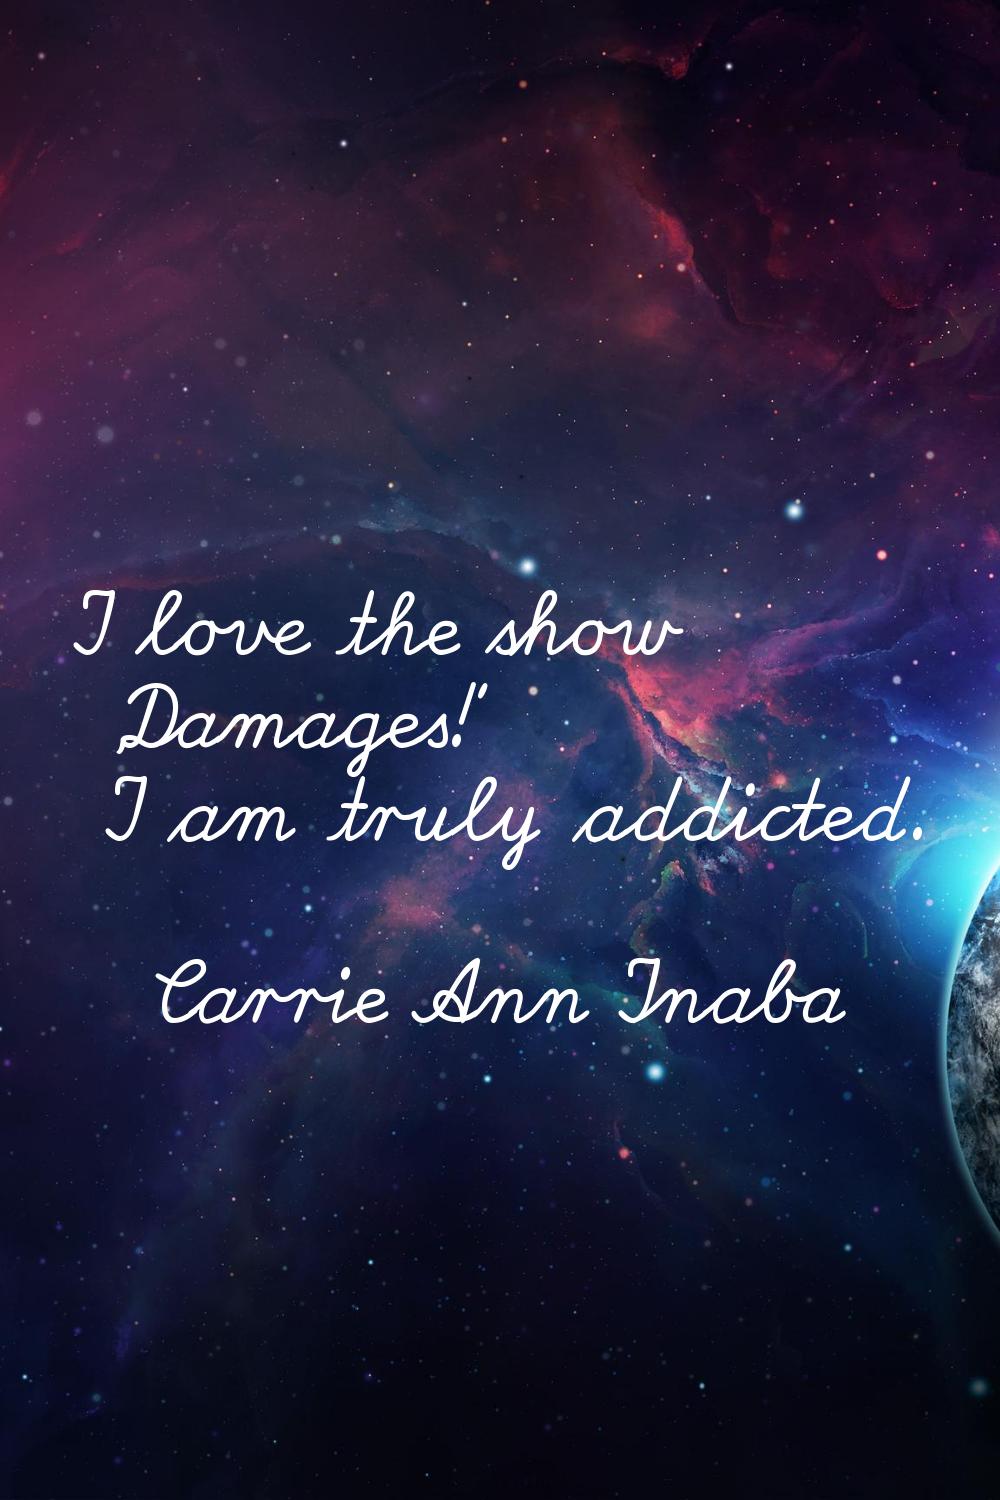 I love the show 'Damages!' I am truly addicted.